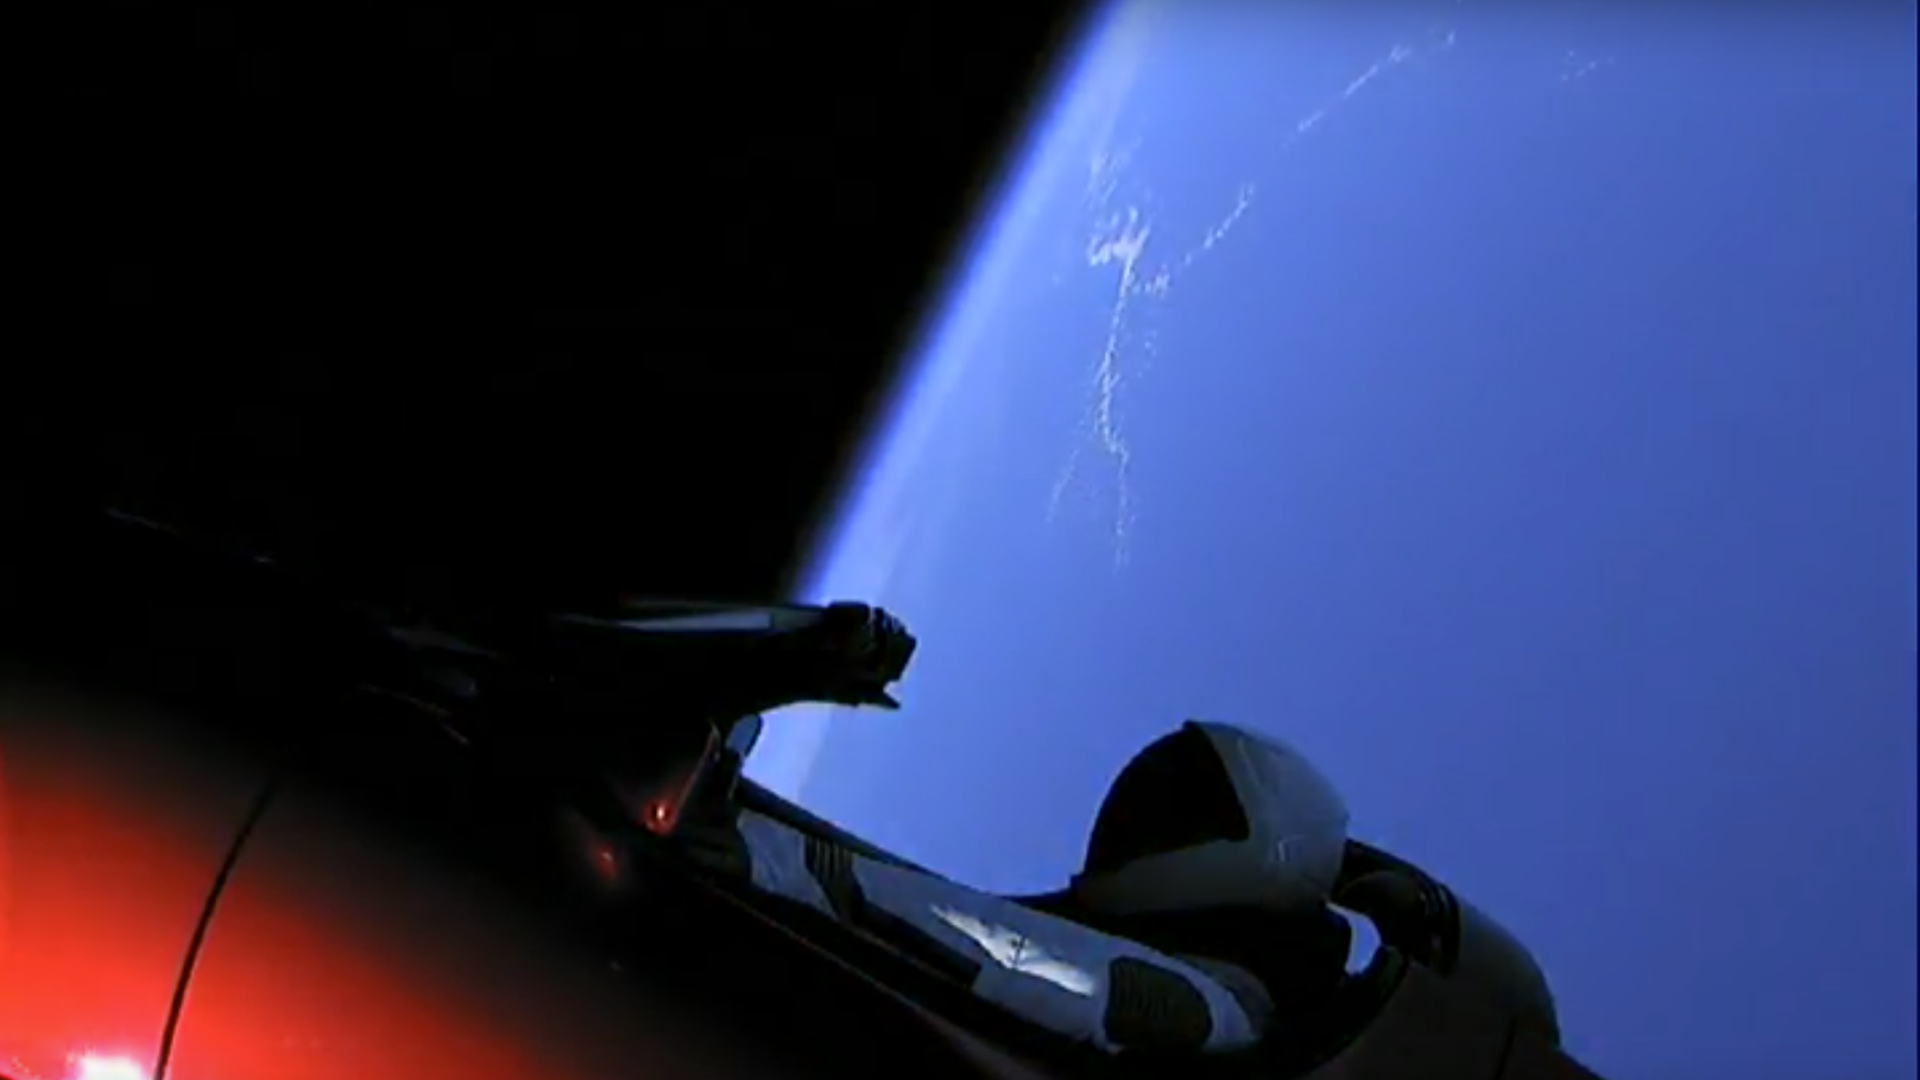 Elon Musk's roadster, with a spacesuit passenger, will remain in orbit around the sun for the foreseeable future.